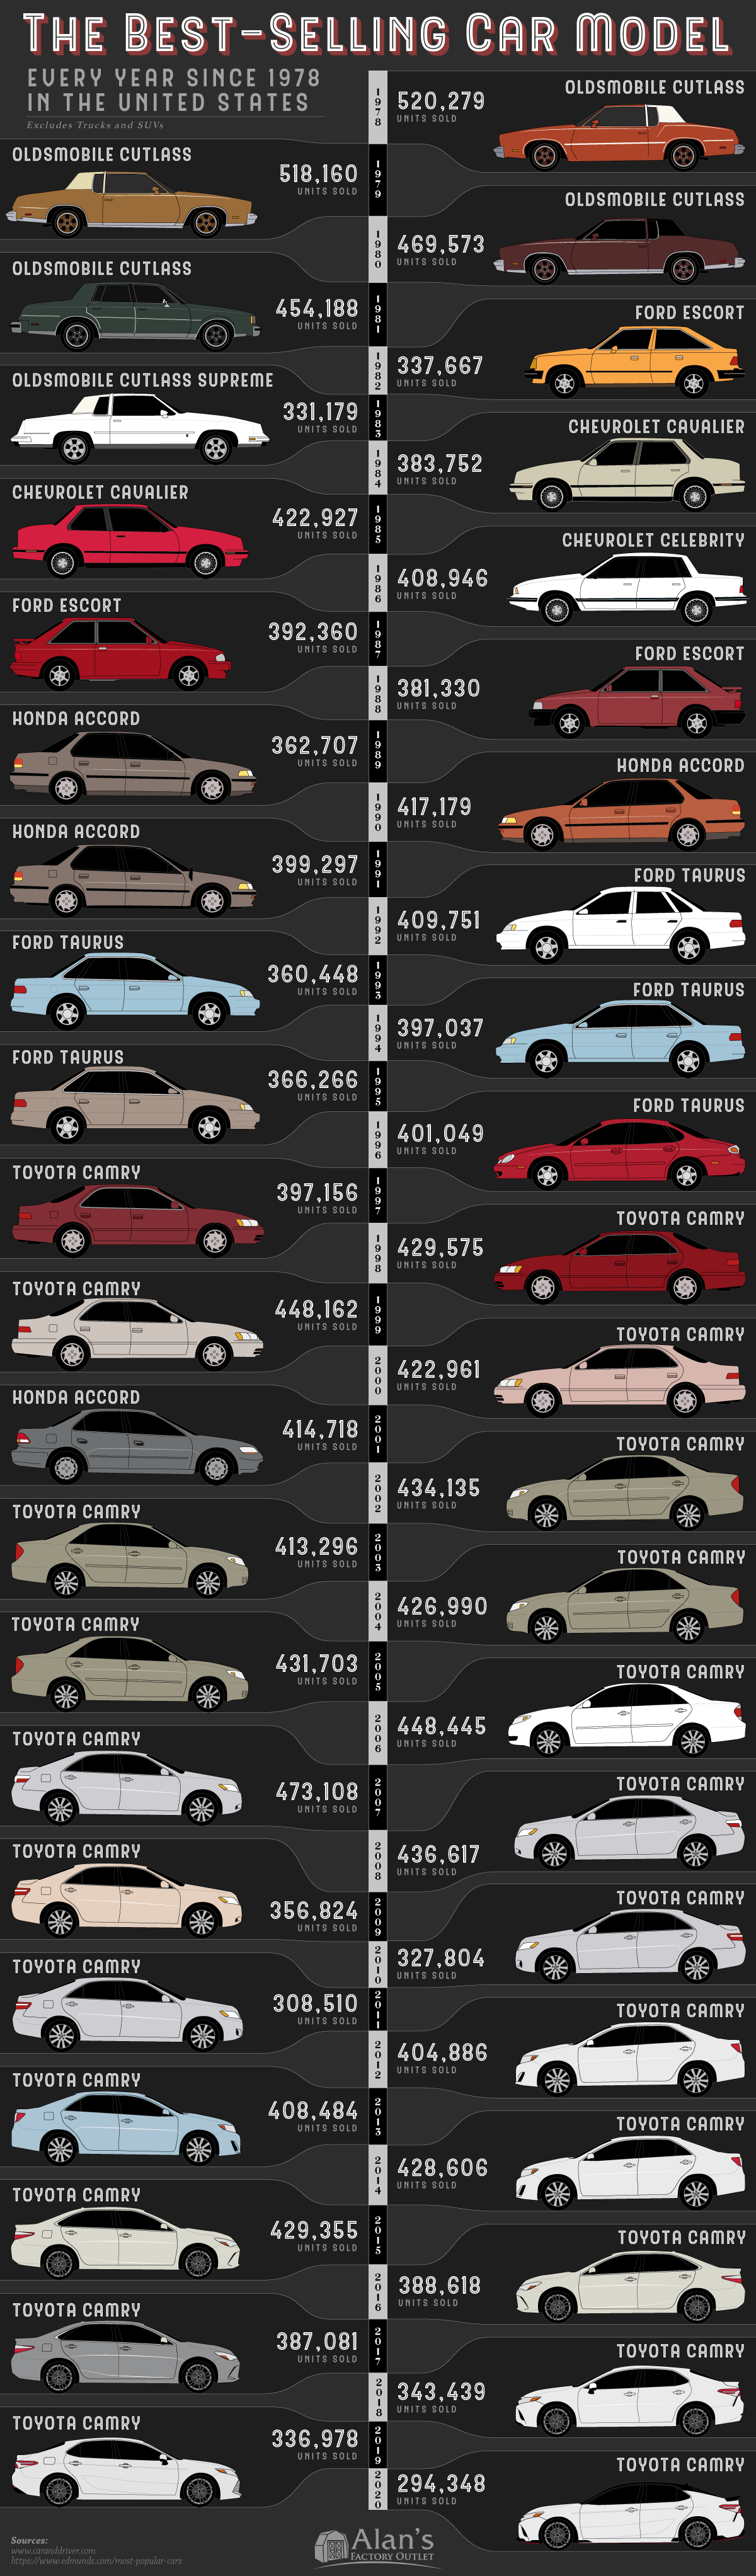 Best Selling Car Of All Time Worldwide Revealed The World’s Best